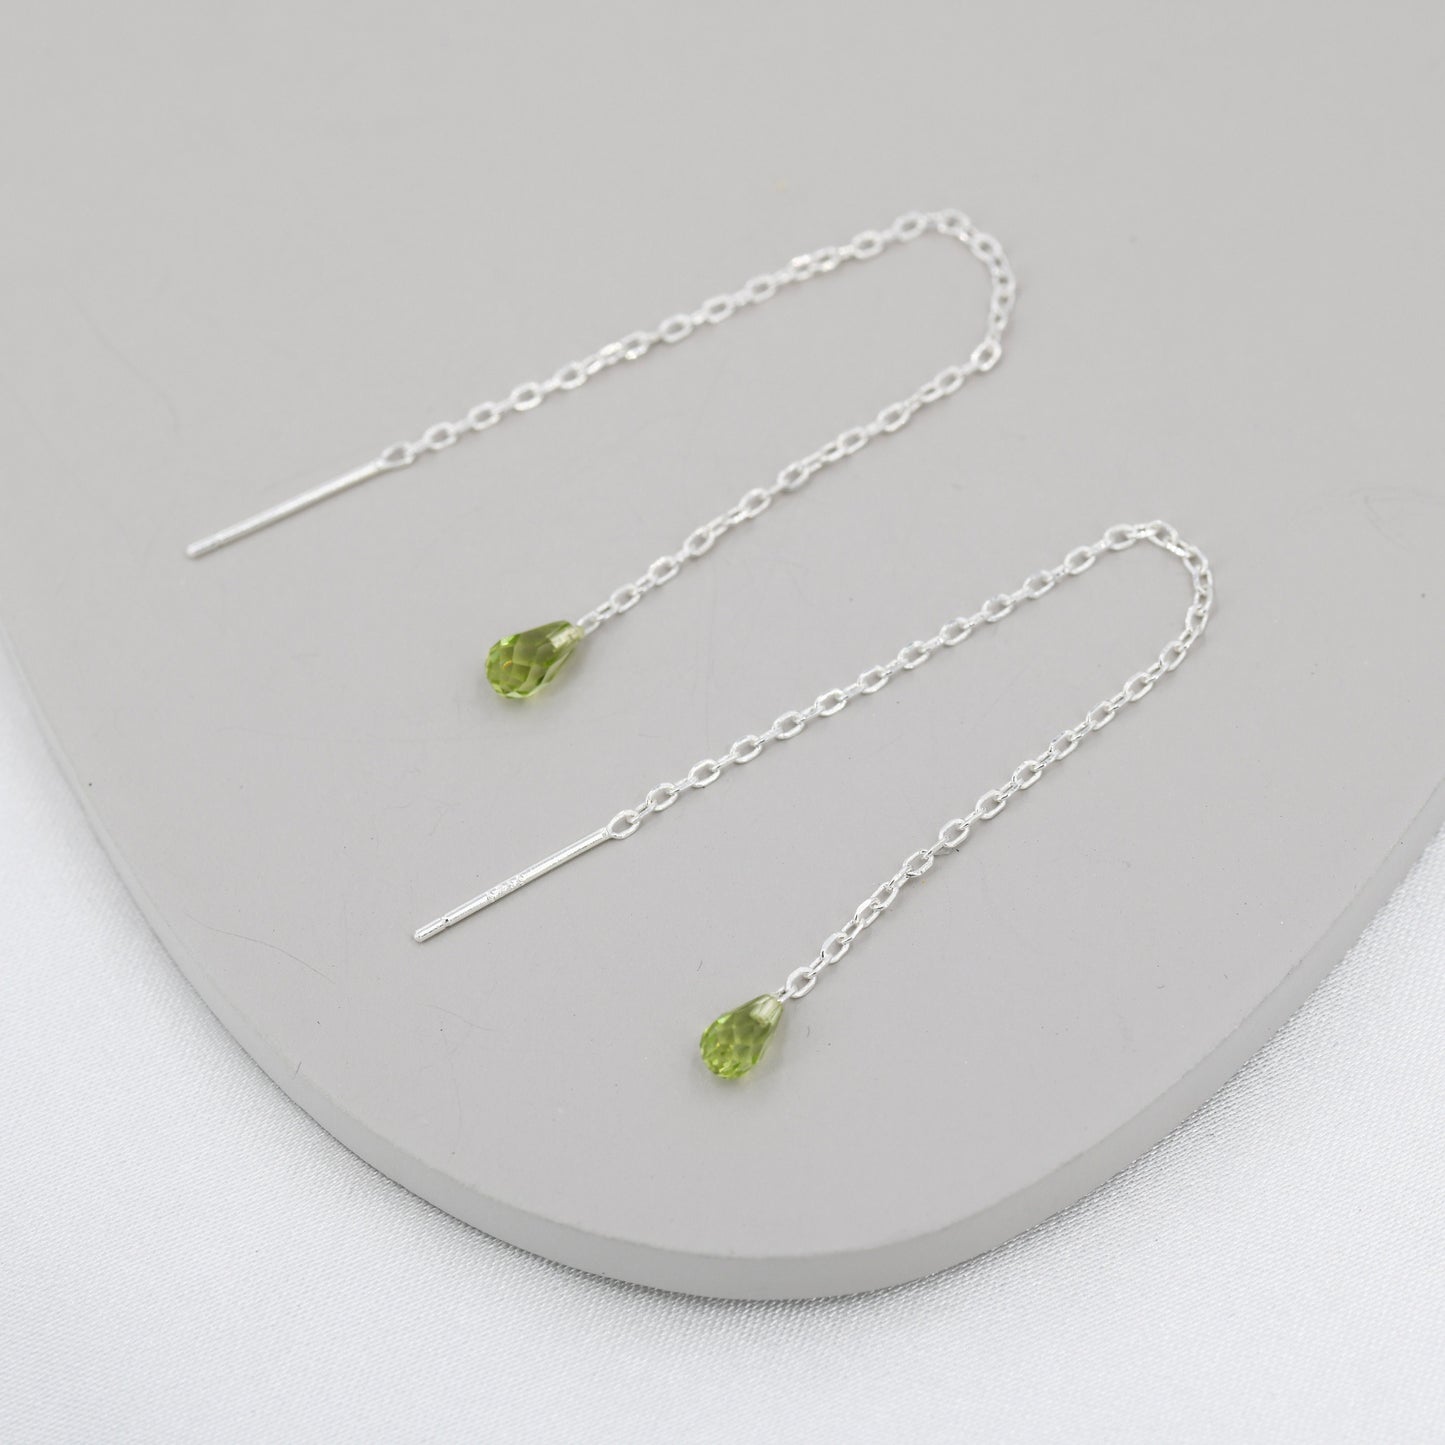 Natural Peridot Droplet Threader Earrings in Sterling Silver, Faceted Peridot Ear Threaders,  Natural Peridot Earrings